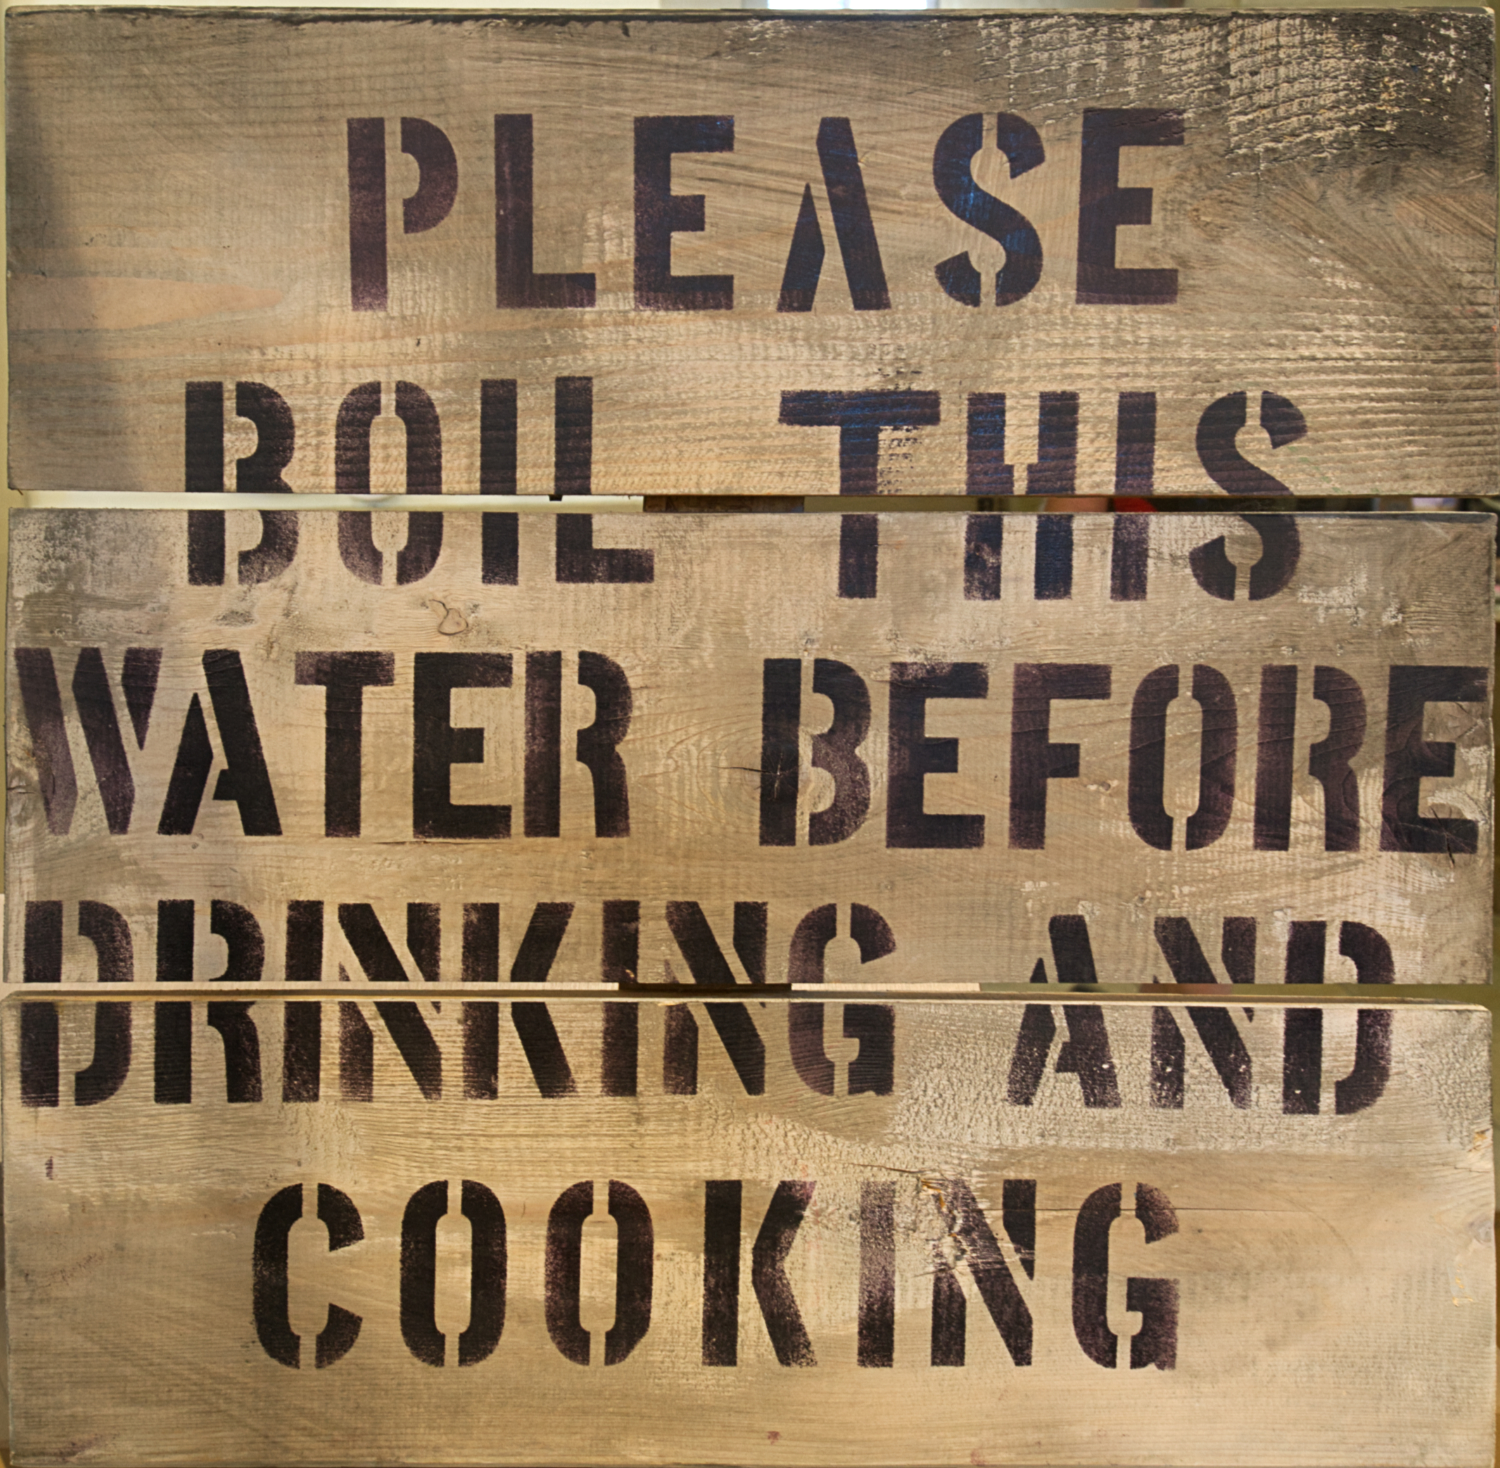 Wooden sign warning residents to boil water before consumption.